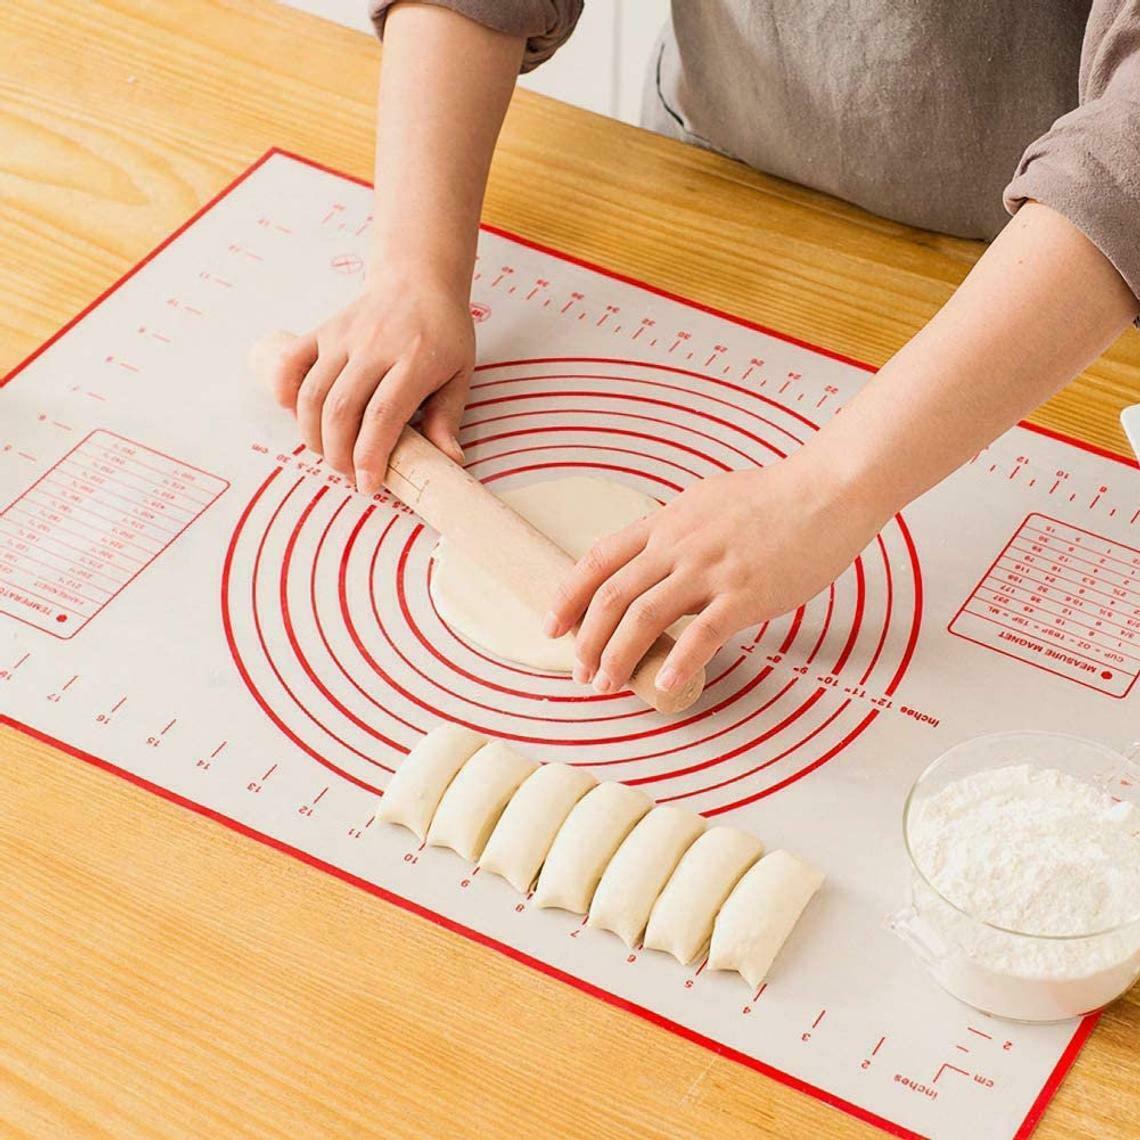 ULTRAKENO Silicone Pastry Mat Extra Large 28x20 Non-Stick Baking Mat with High Edge, Food Grade Silicone Dough Rolling Mat for Making